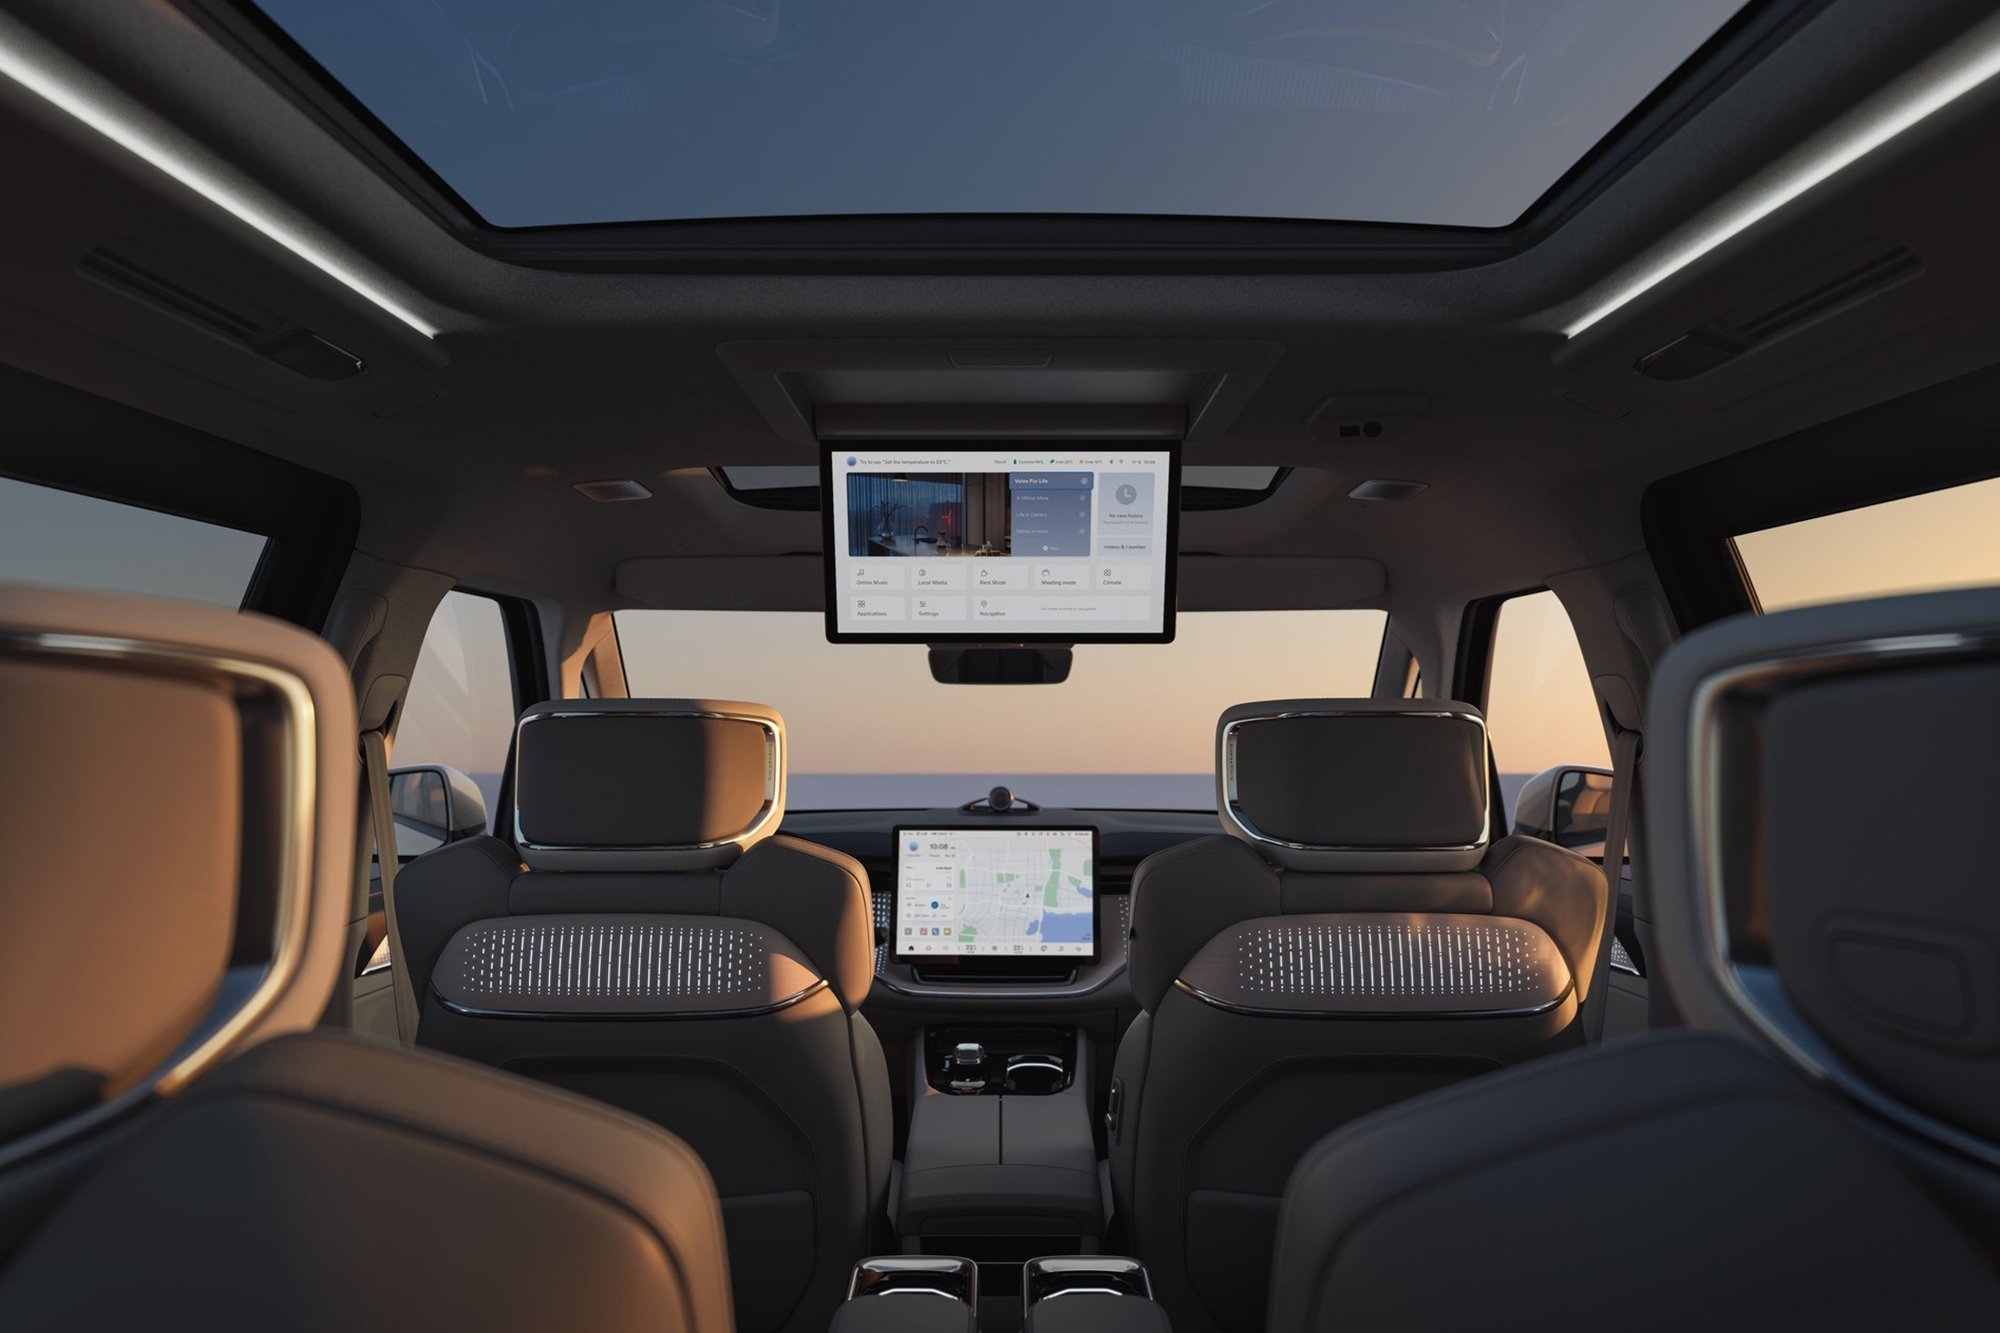 The spacious and luxurious interior design of the all-electric Volvo EM90